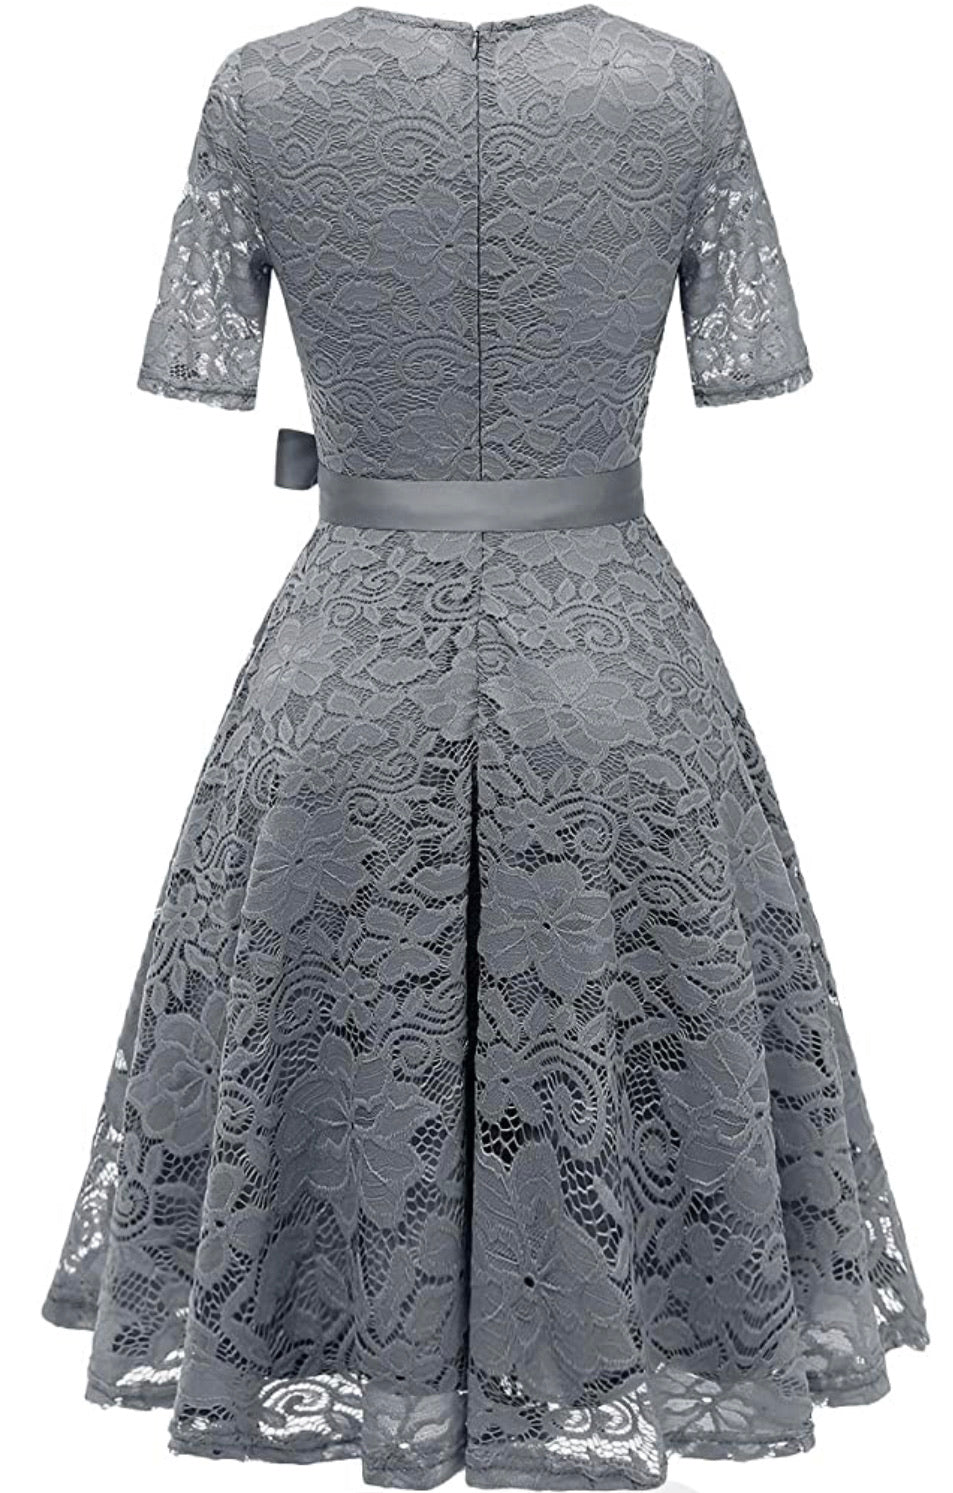 Vintage Inspired Full Lace Cocktail Dress, Sizes Small - 3XLarge (Gray)